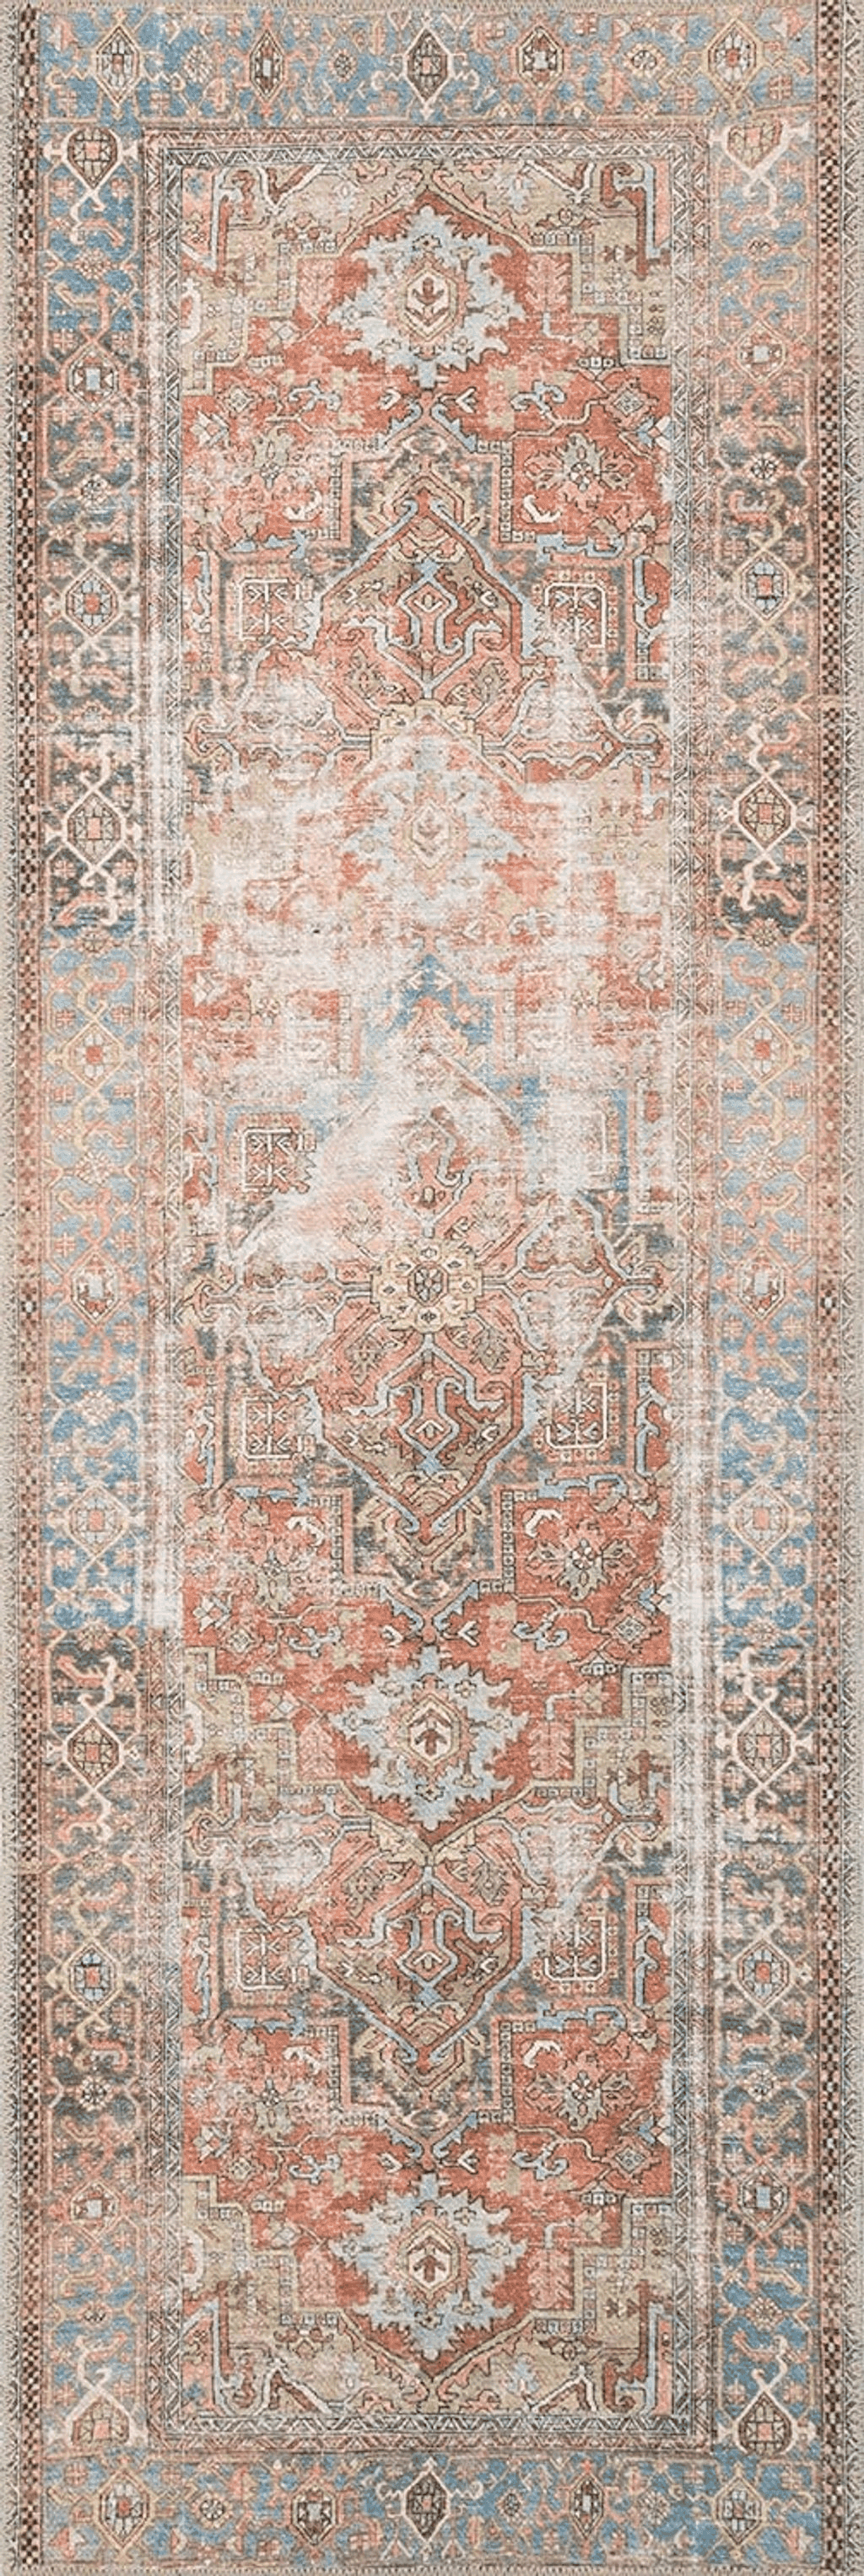 Terracotta Loloi II Loren Collection LQ-15, Terracotta/Sky 3'-6" x 5'-6", Accent Rug, Soft, Durable, Vintage, Distressed, Low Profile, Non-Shedding, Easy Clean, Living Room Rug